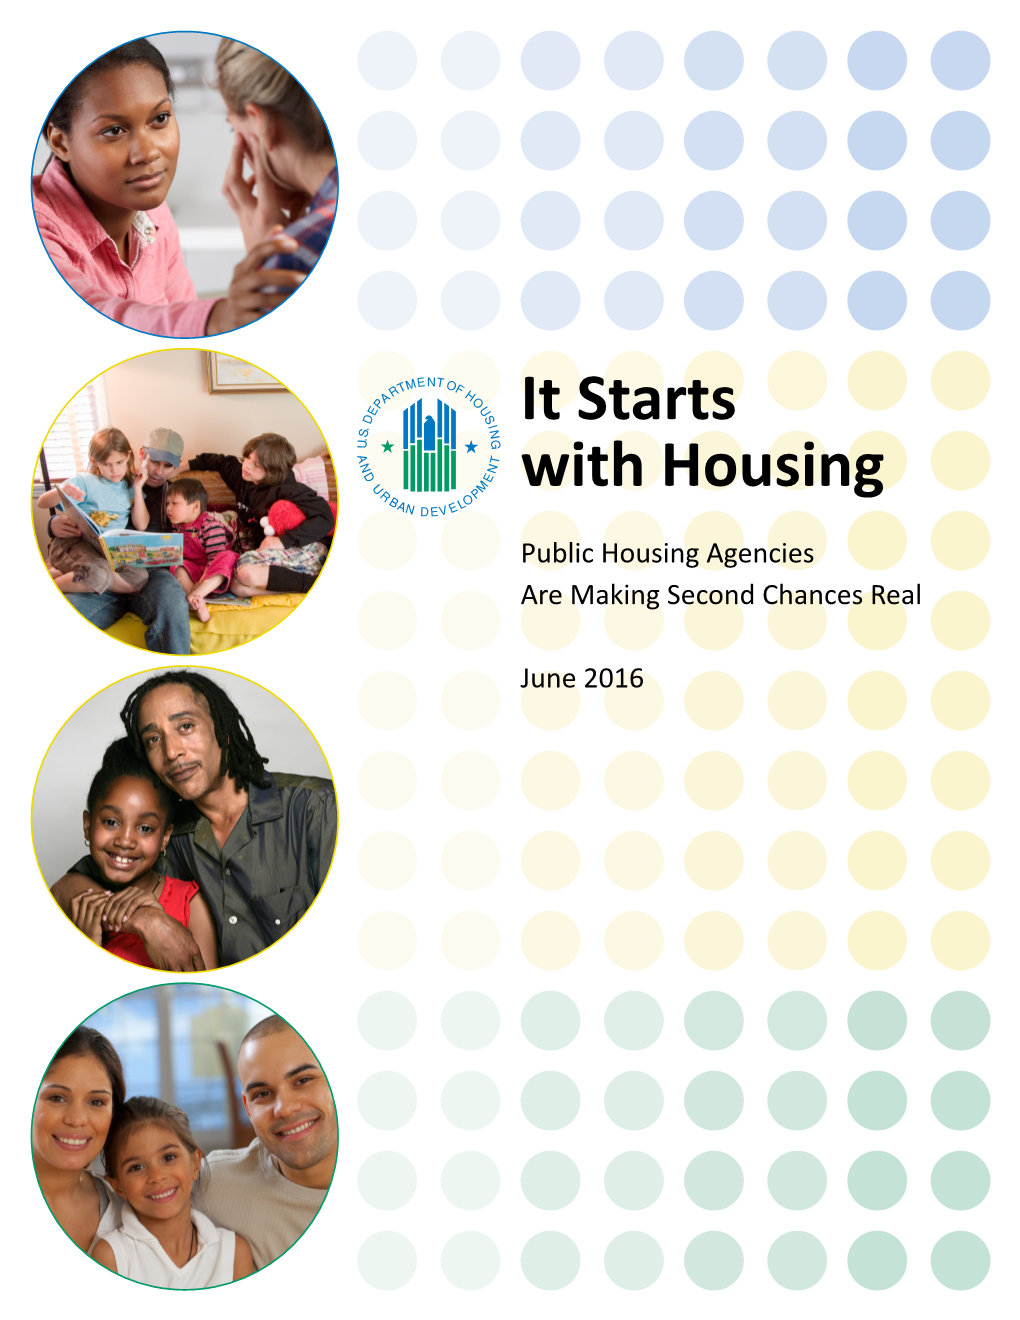 It Starts with Housing: Public Housing Agencies Are Making Second Chances Real